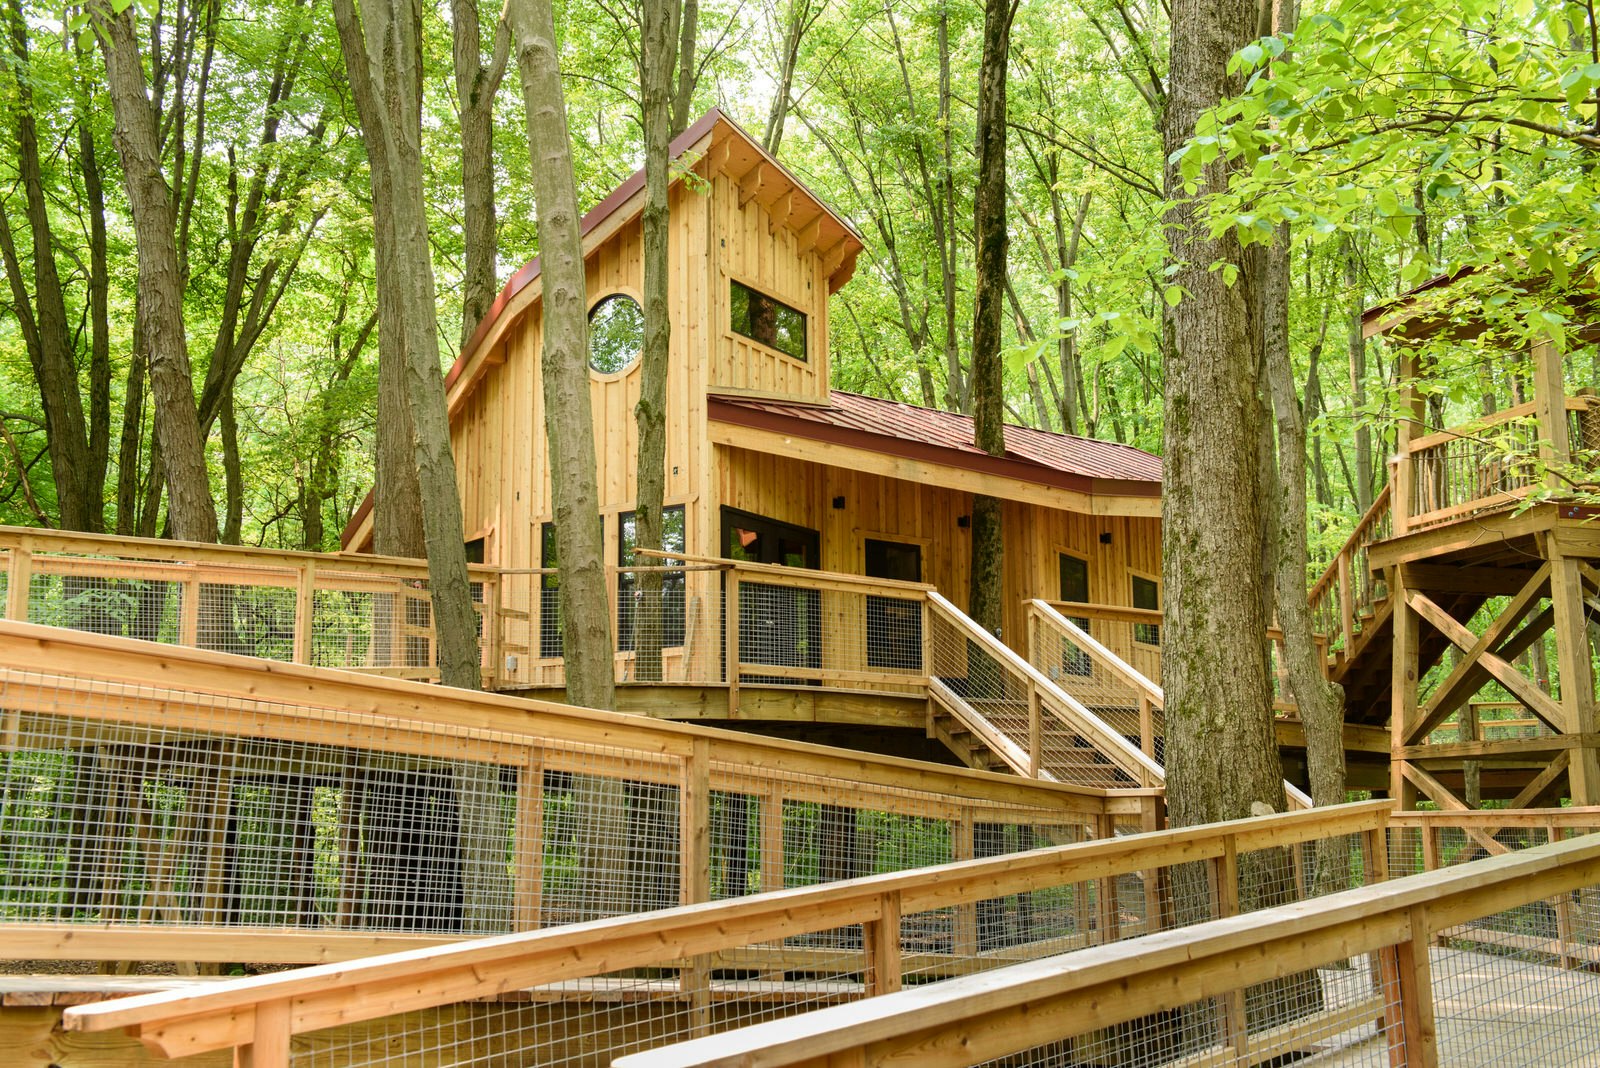 The common treehouse at Metroparks Toledo